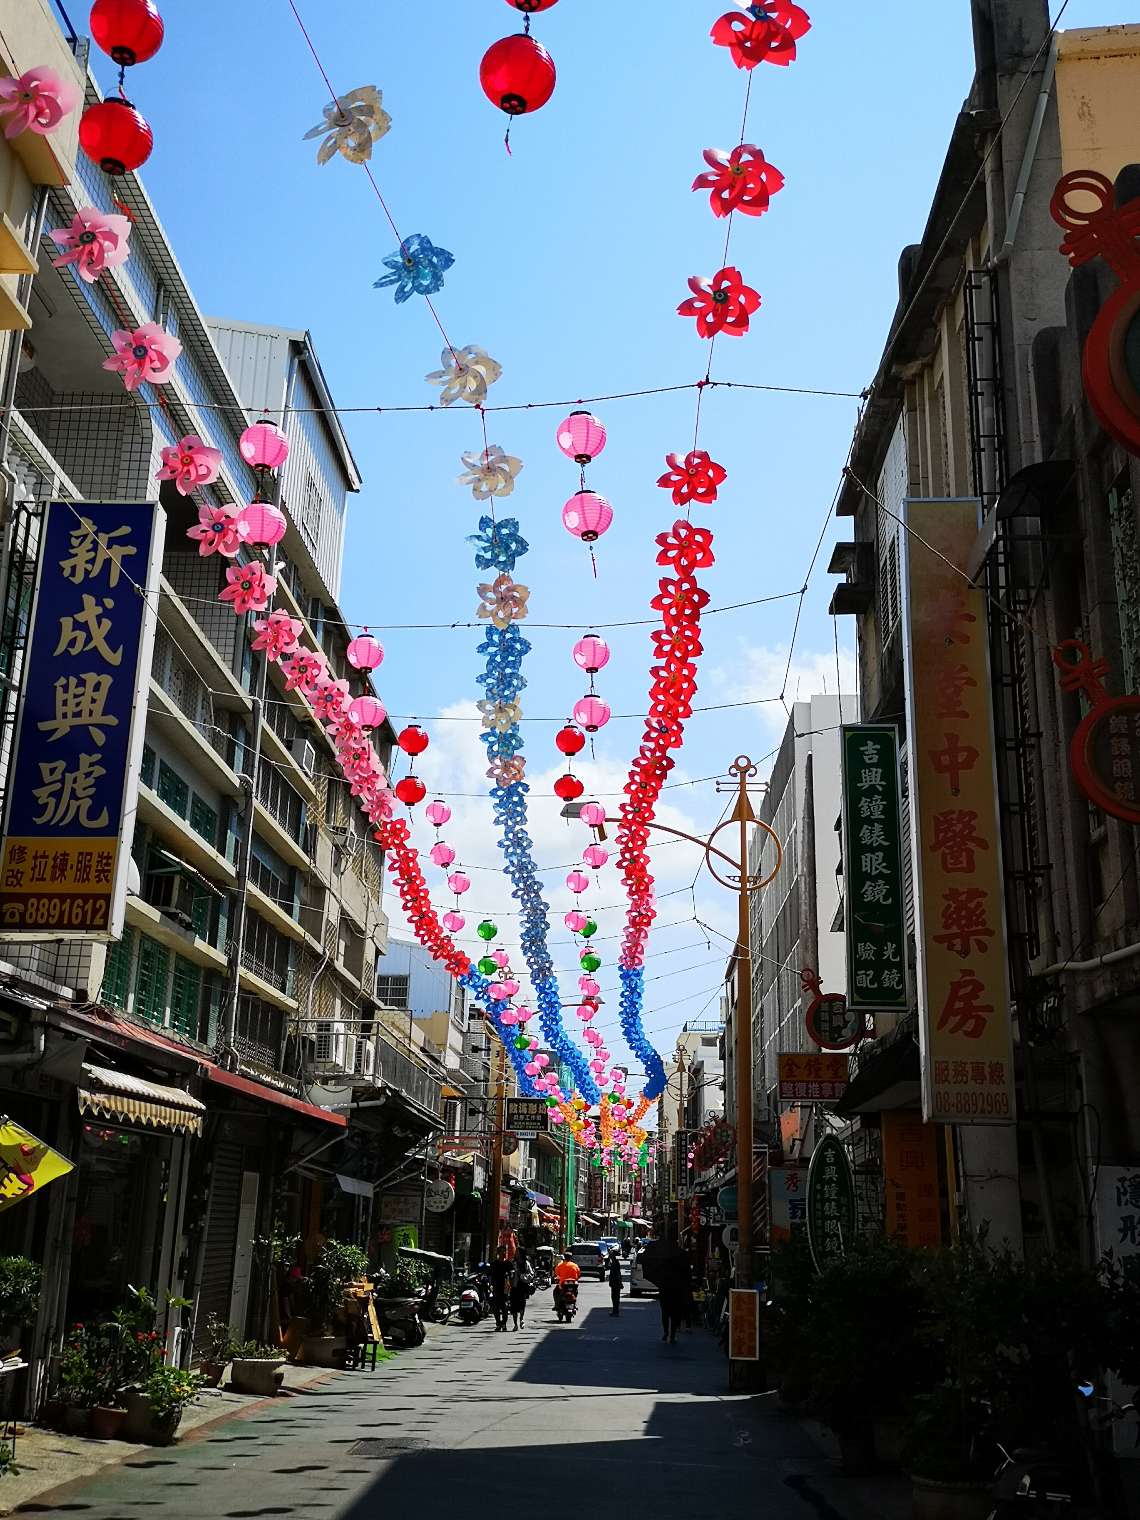 Paper pinwheels strung above the streets in Heng Chun old town